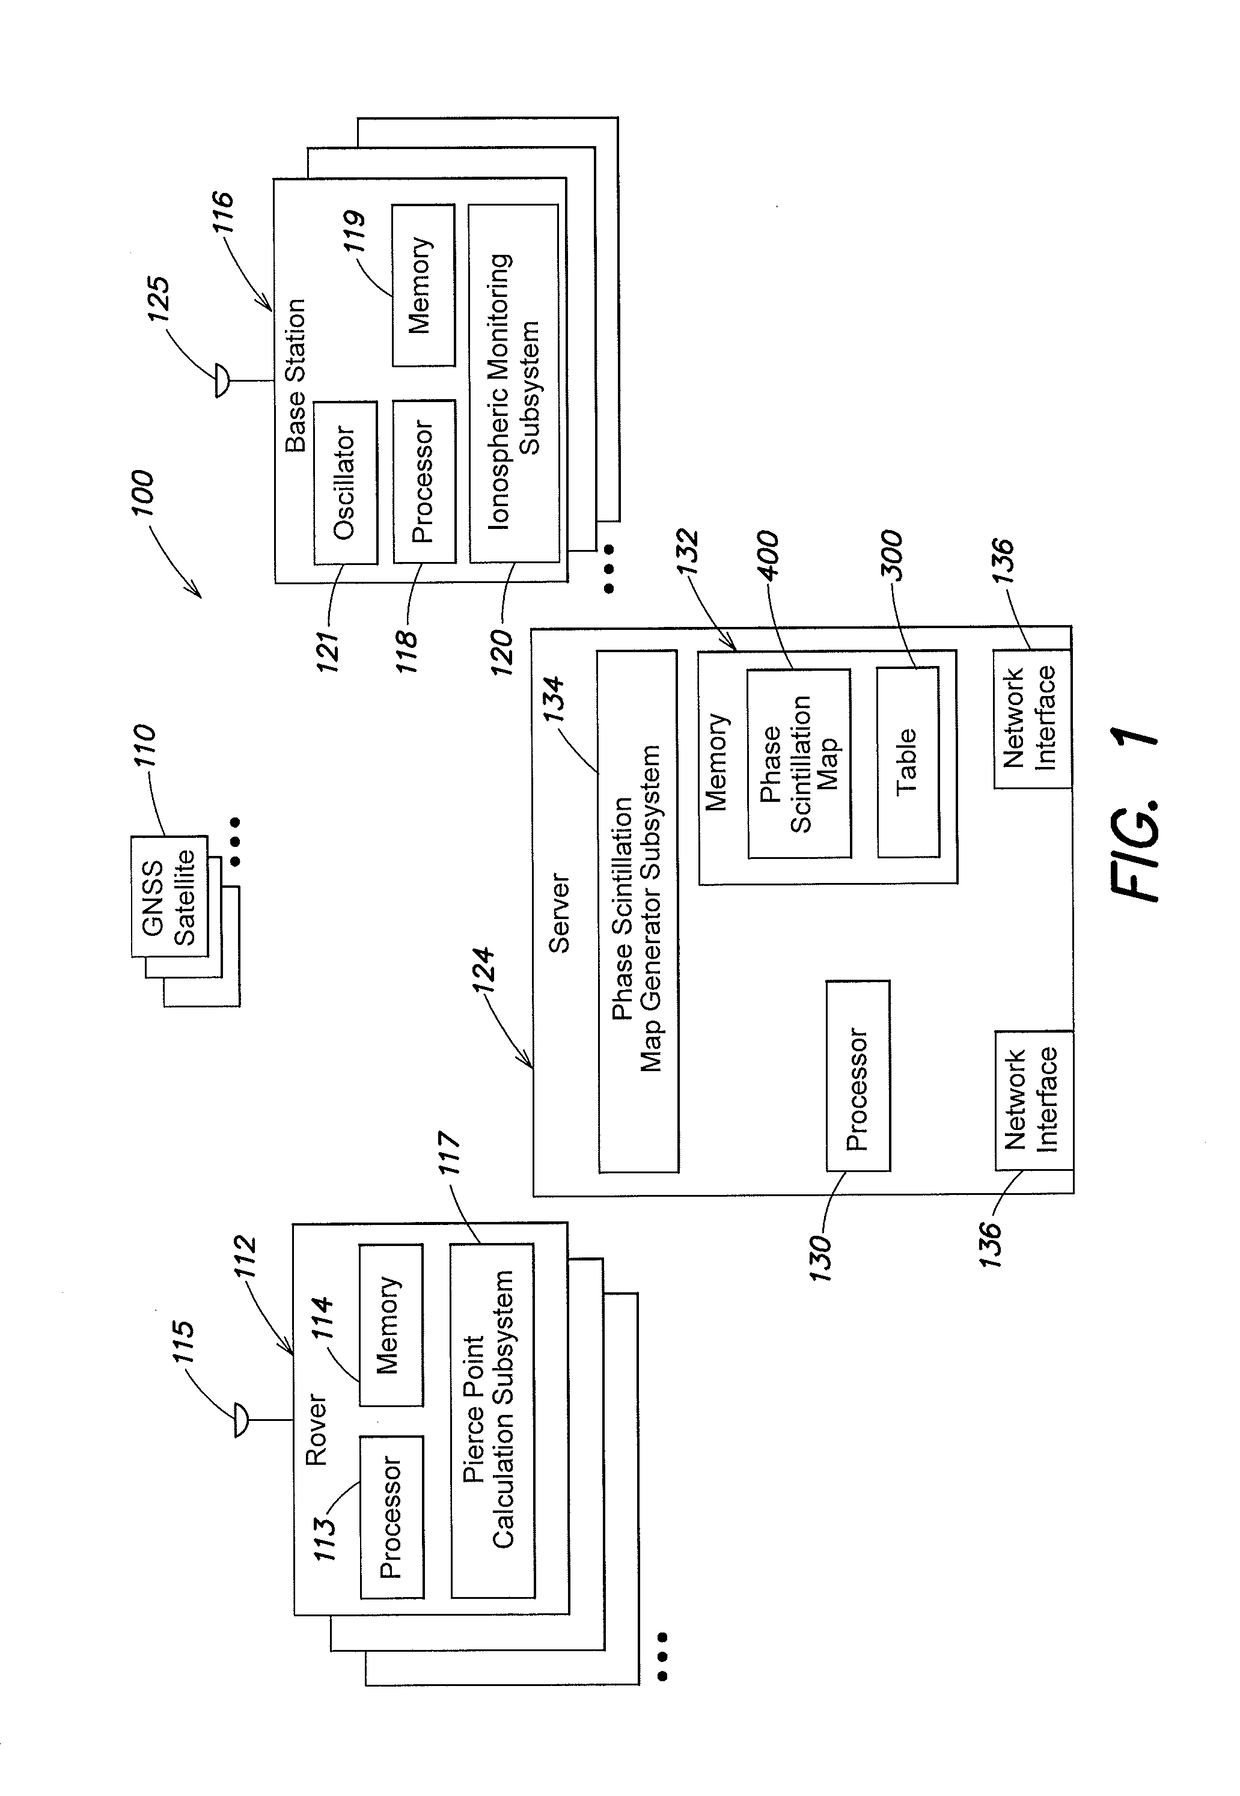 System and method for generating a phase scintillation map utilized for de-weighting observations from GNSS satellites